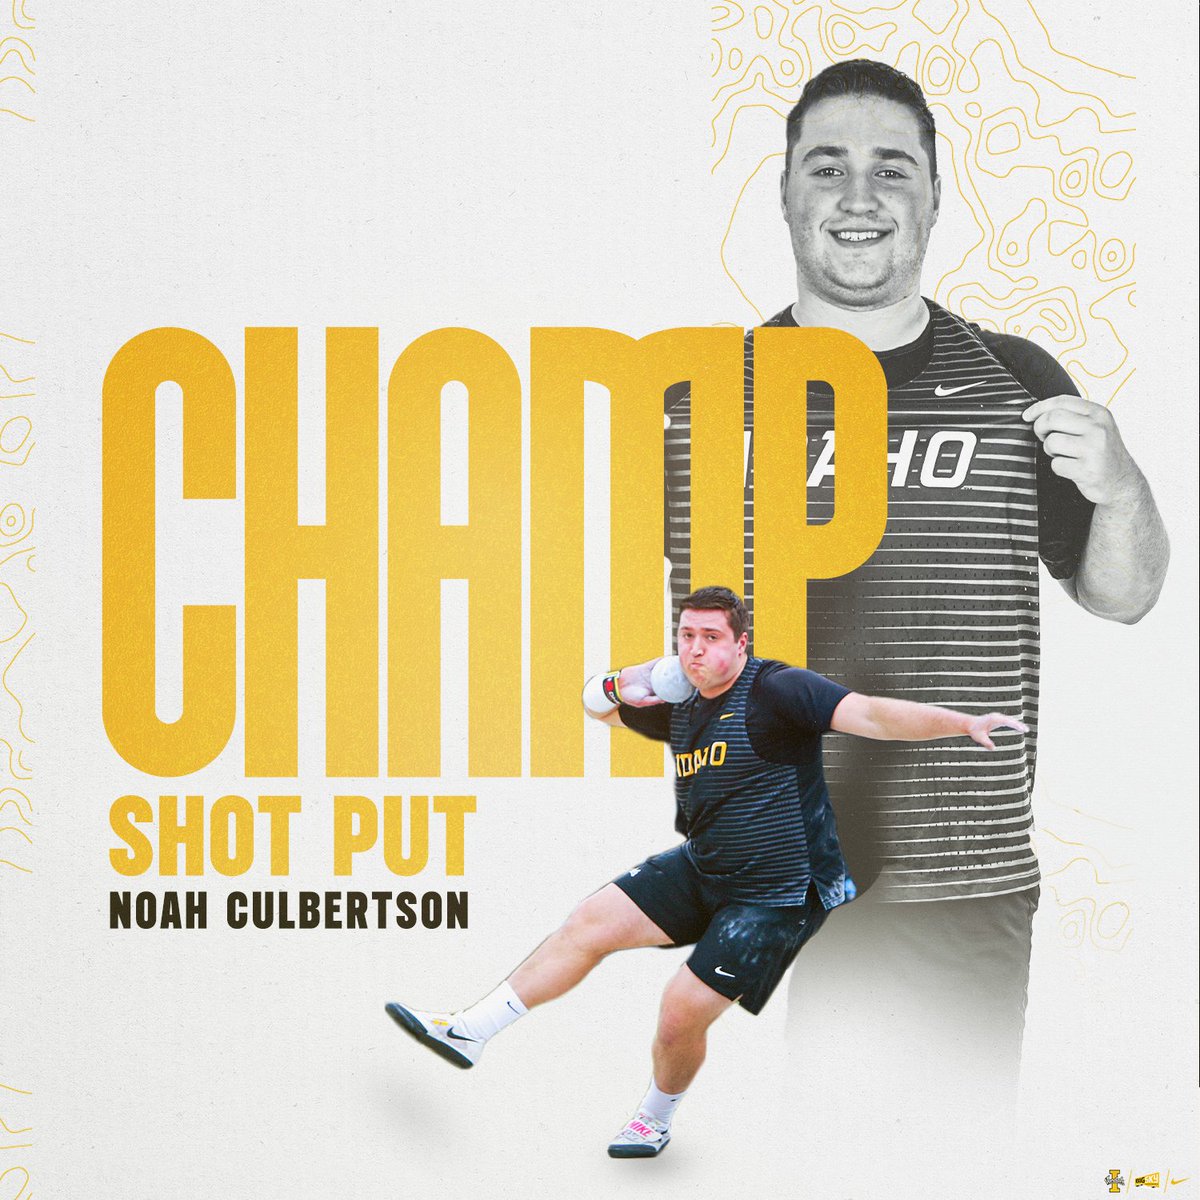 The Vandals have another champion! 🏆

Noah Culbertson brings home gold in the shot put with a personal best performance of 18.10m.

#GoVandals